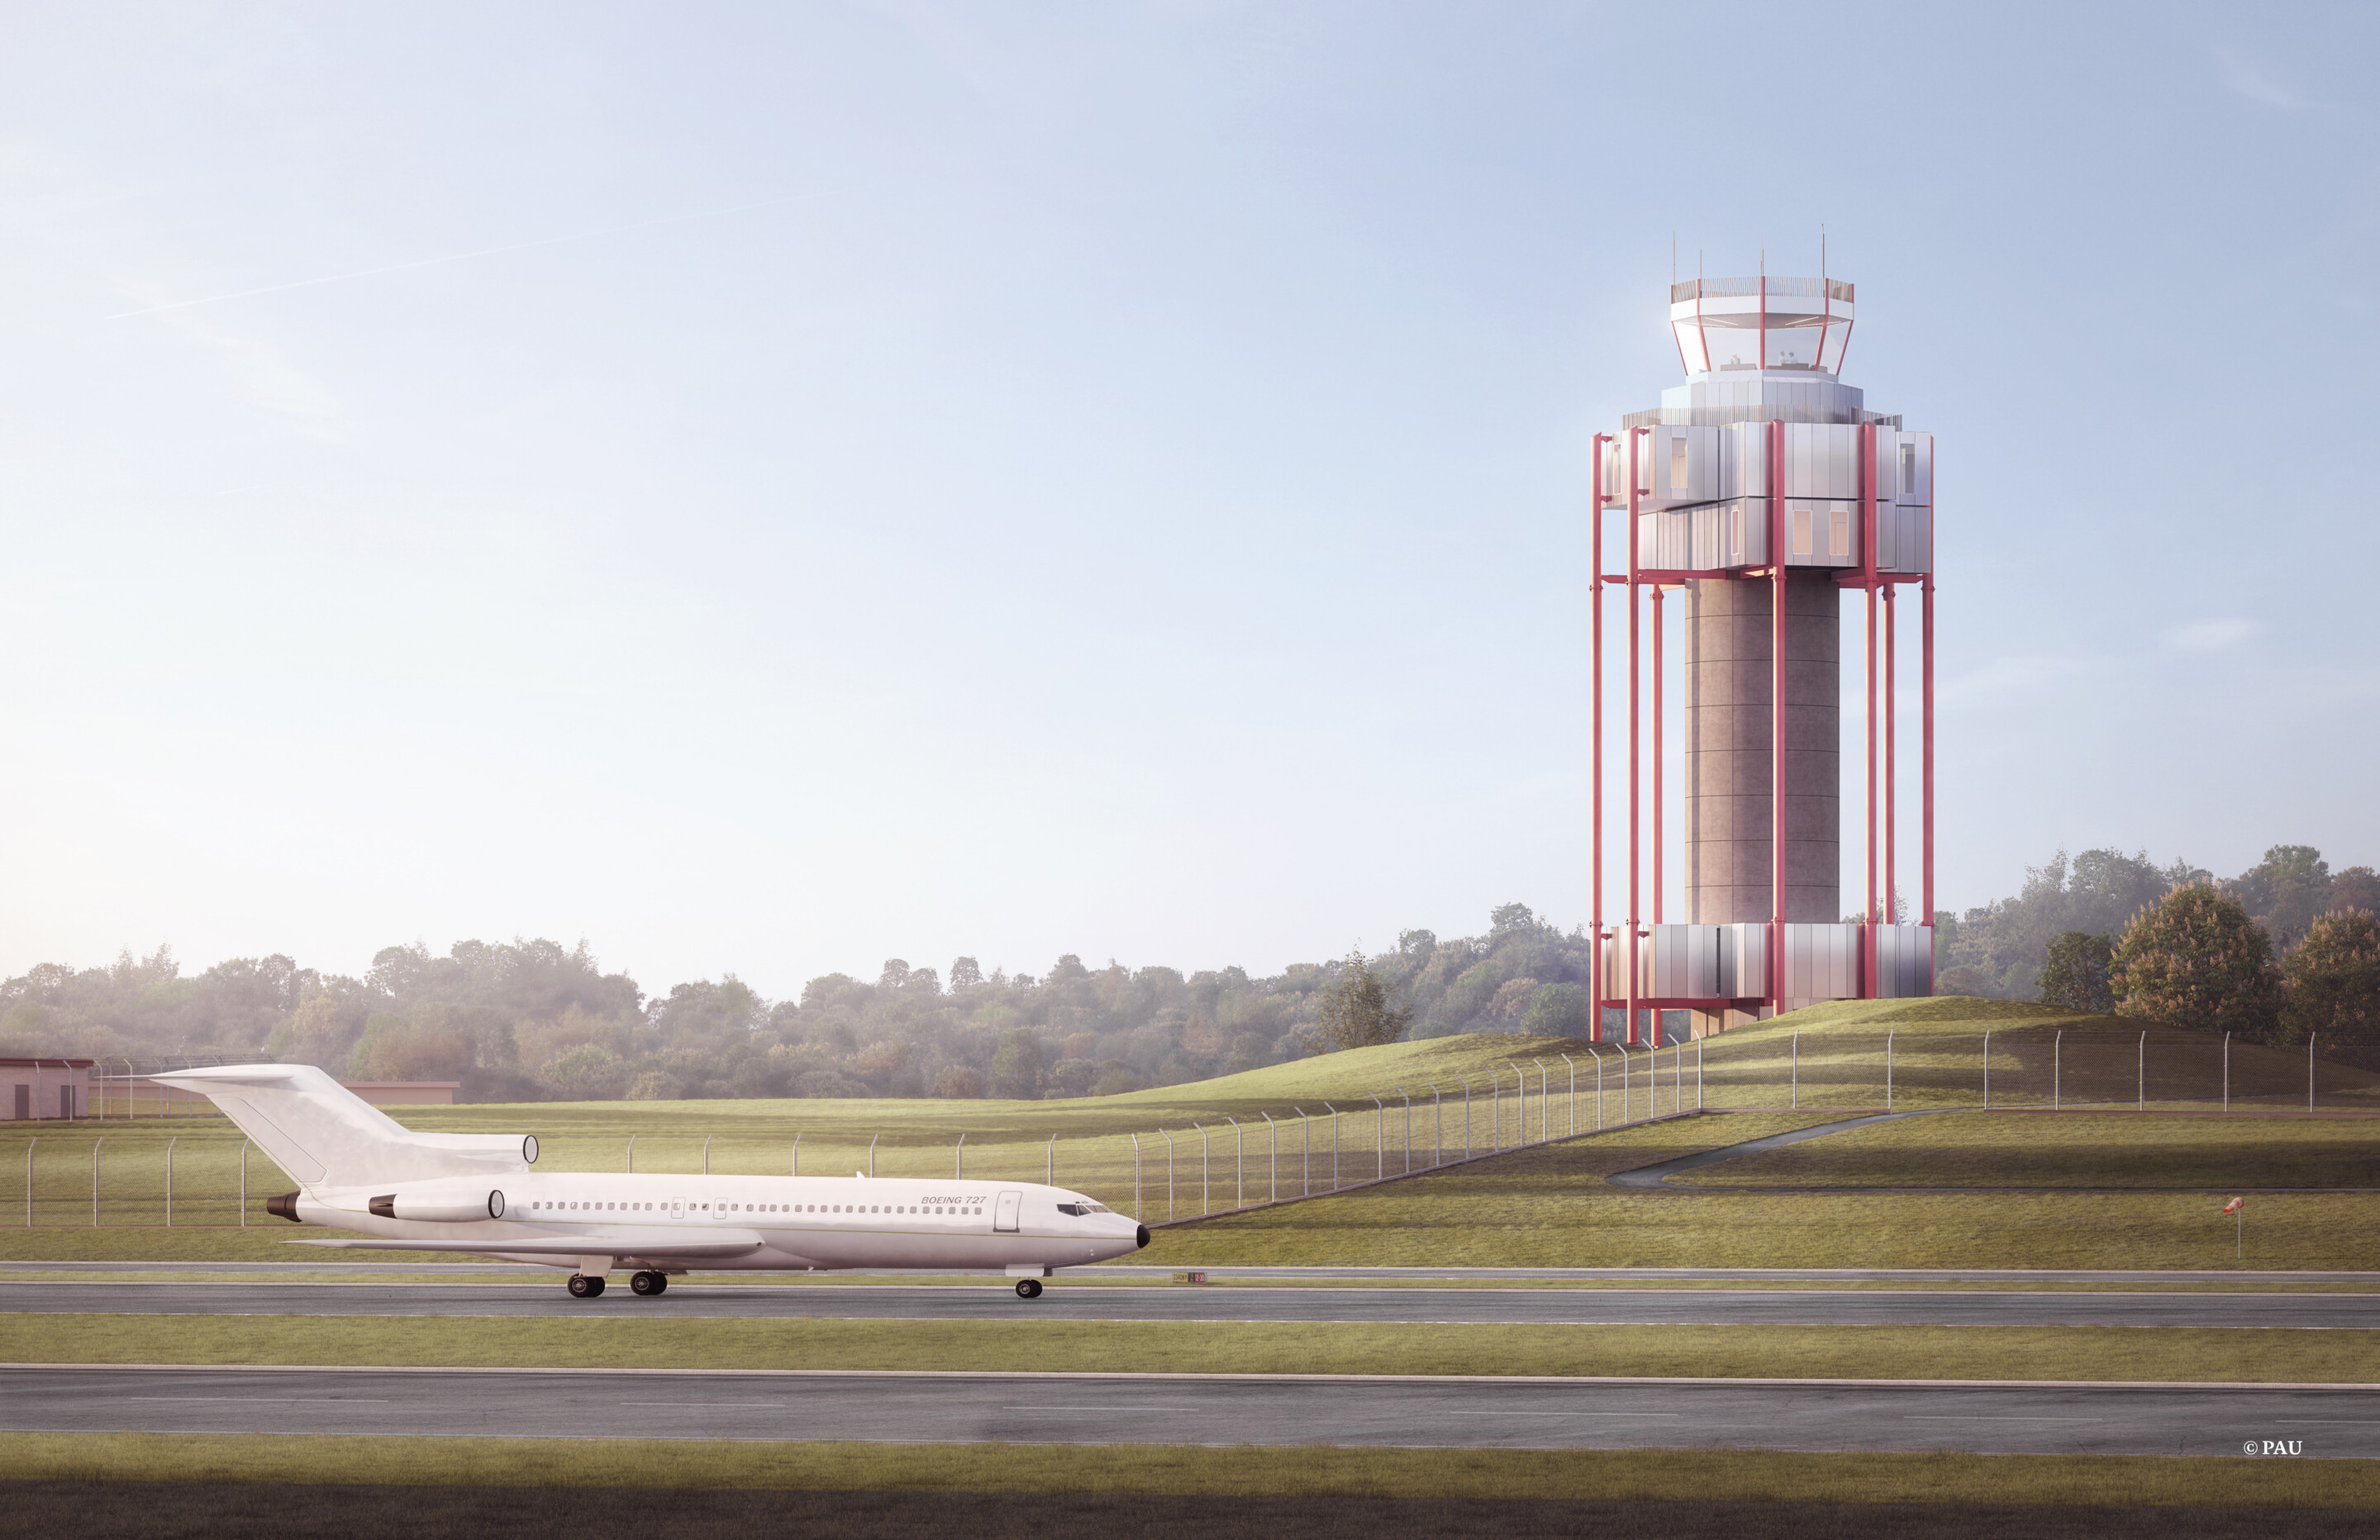 rendering of an air traffic control tower behind a runway